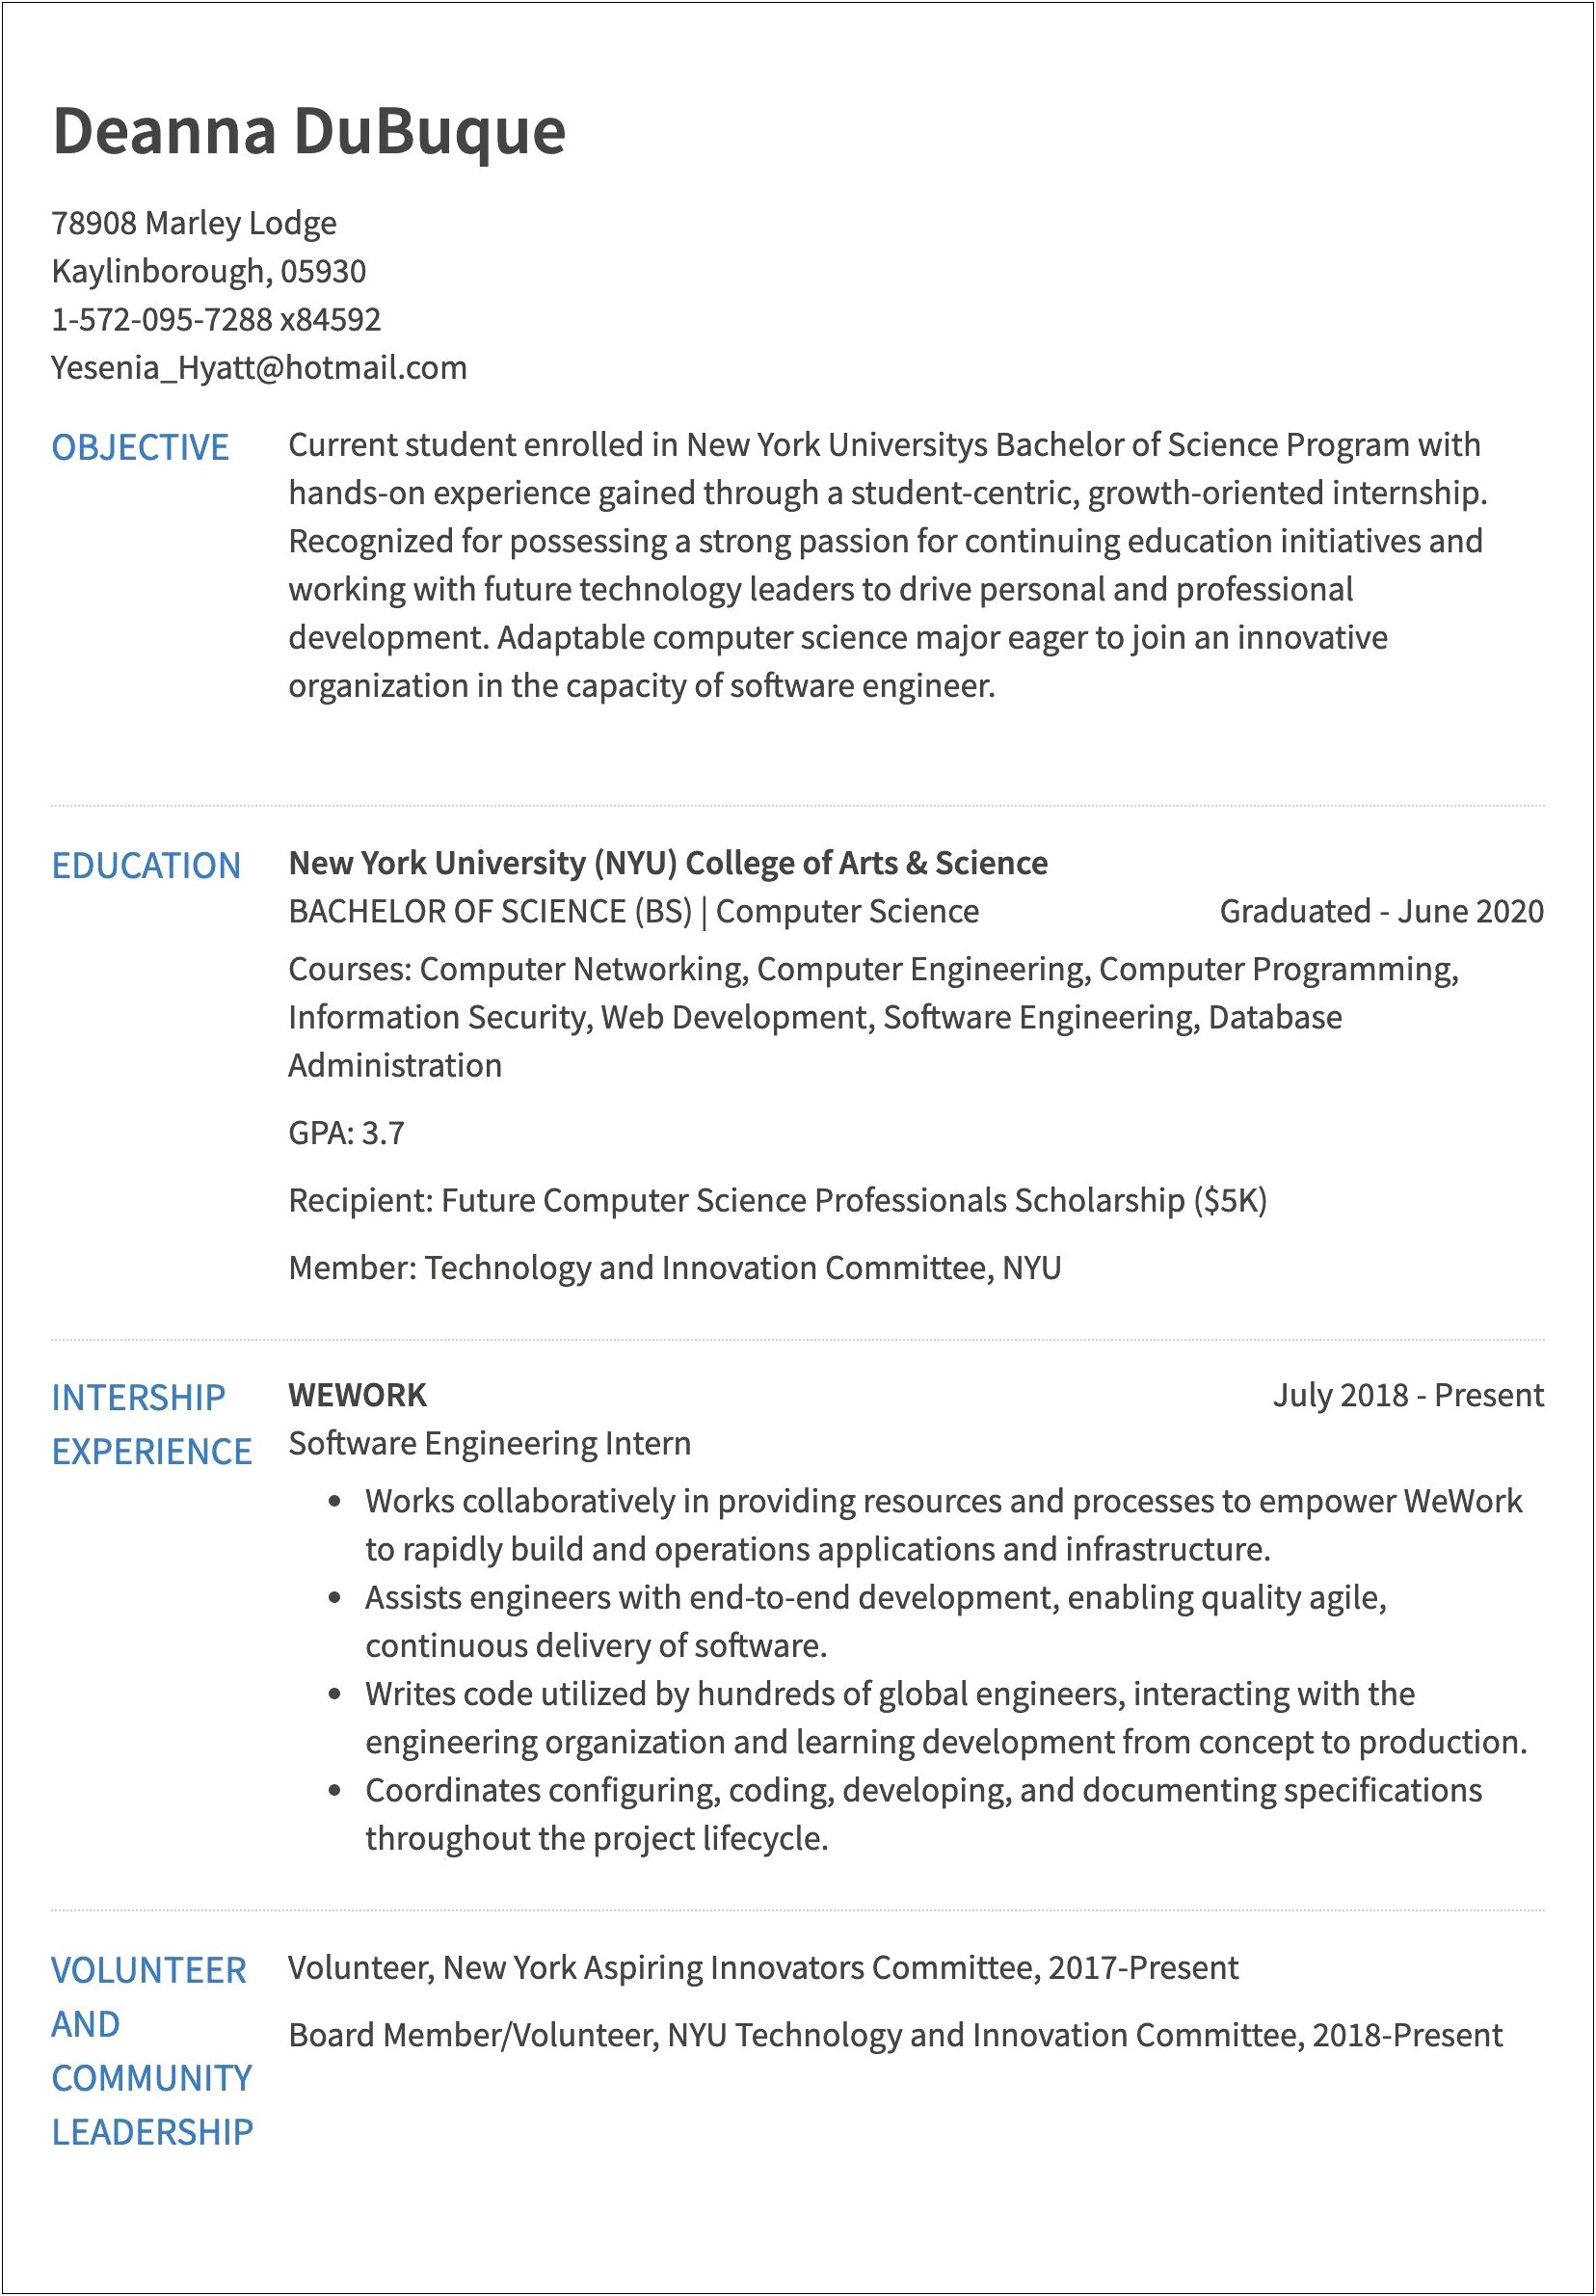 Resume Objective Examples For Computer Networking